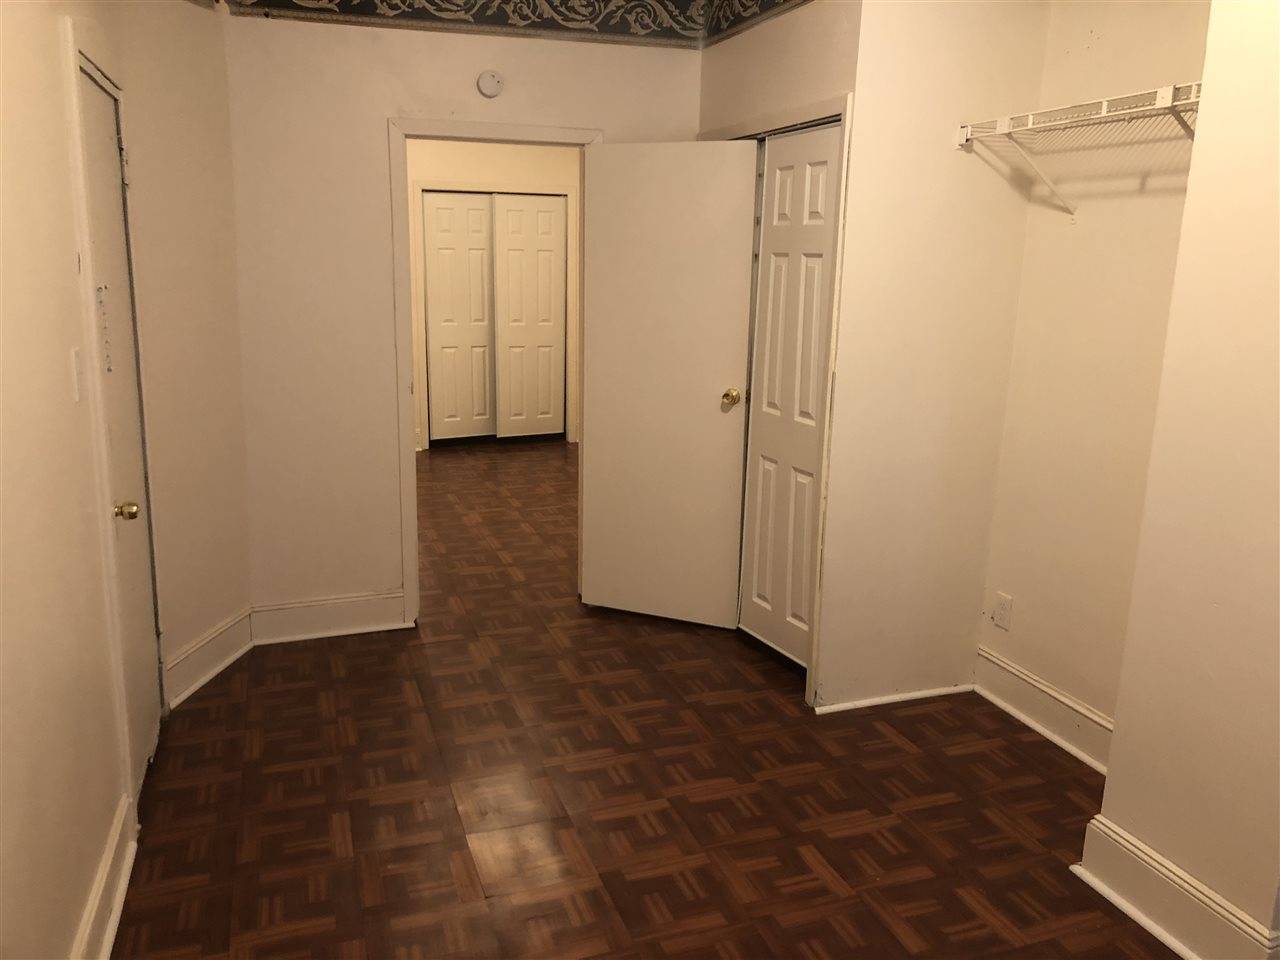 Newly renovated railroad two bedroom (walk through one room to get to next) in a prime location in JC Heights